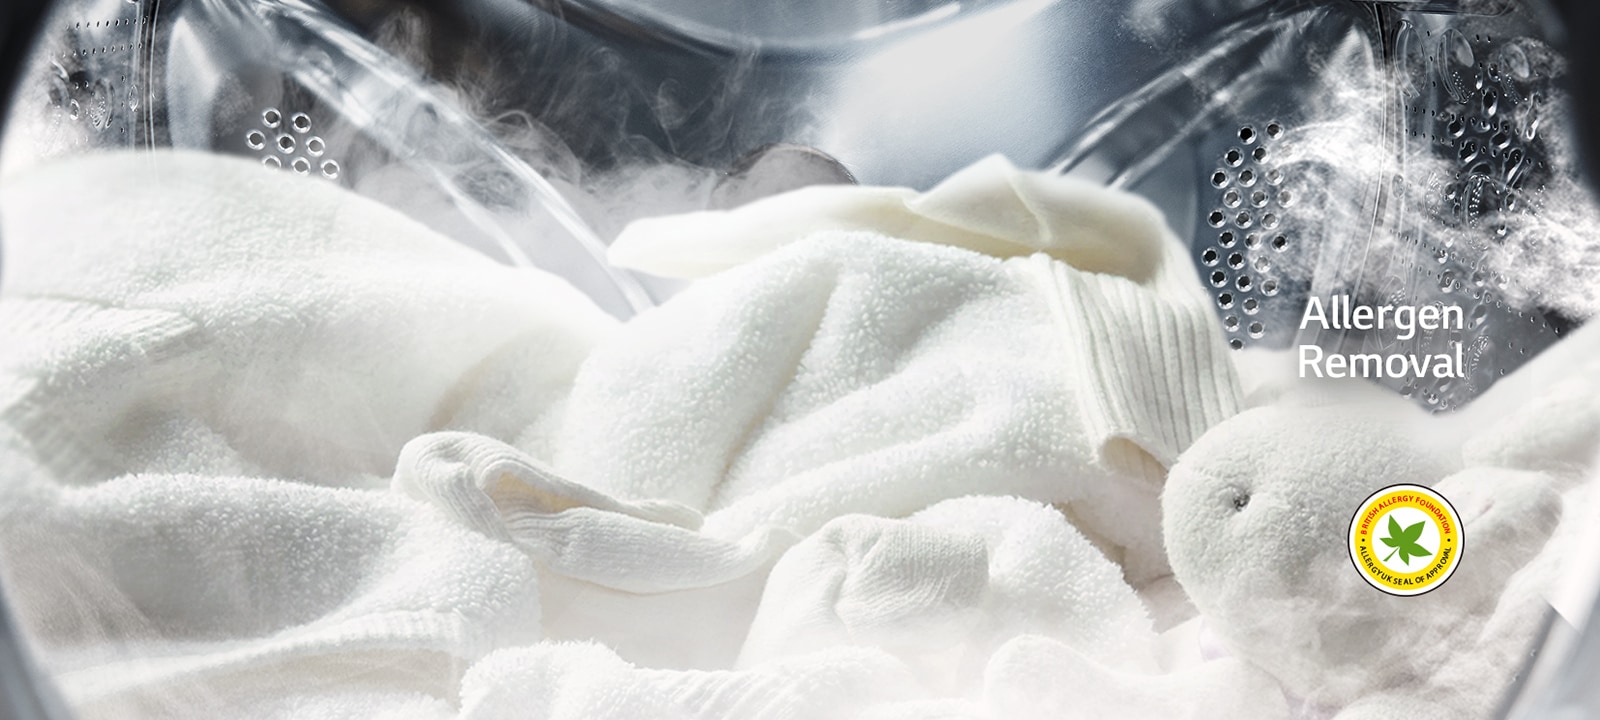 A soft white robe and stuffed animal are shown with steam in the drum of the washing machine.